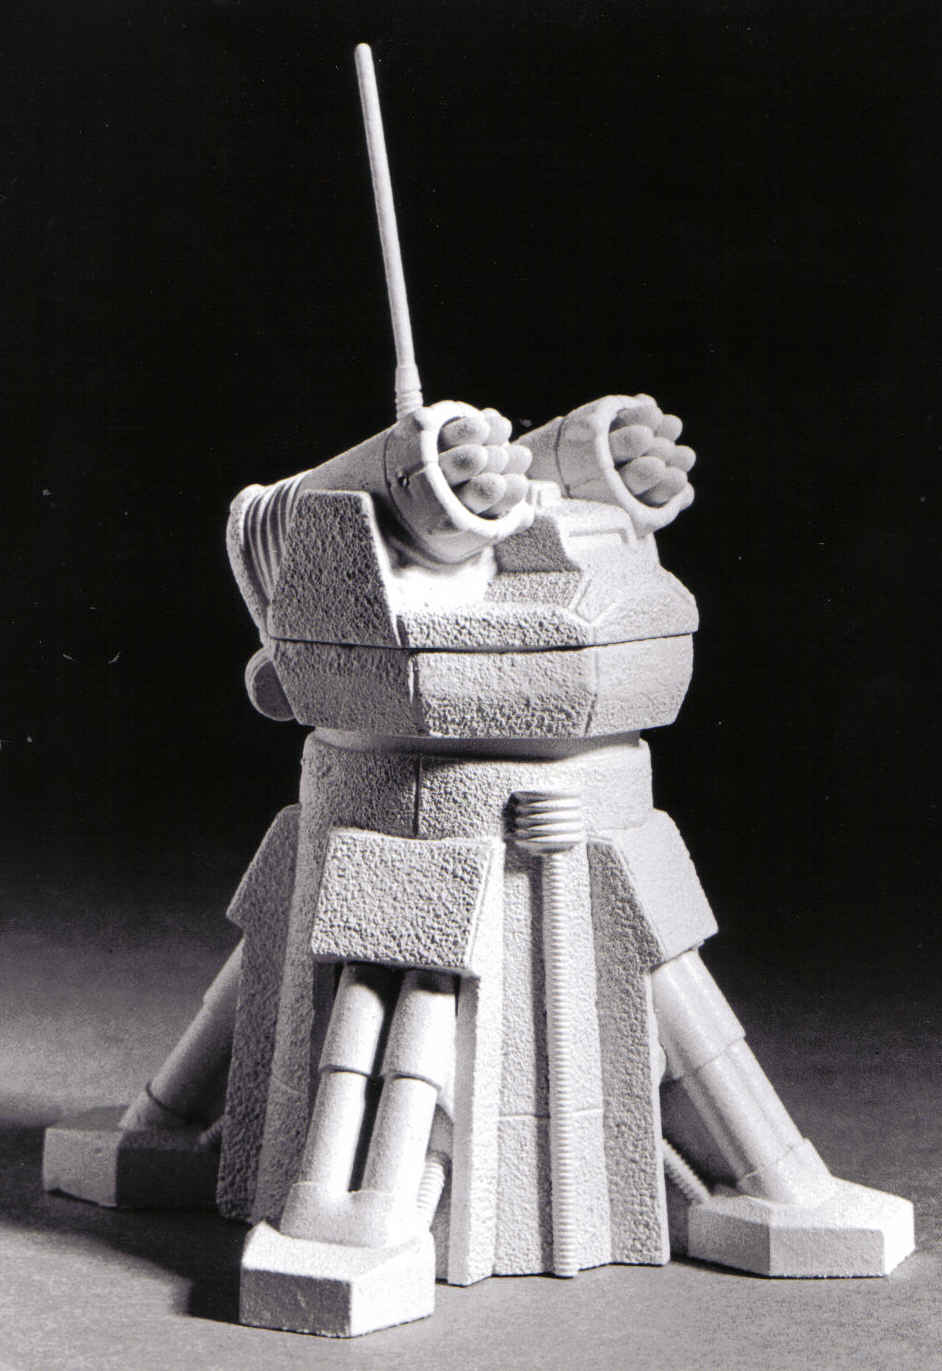 NBO-024 - Advance Gun Tower with V12 Missiles